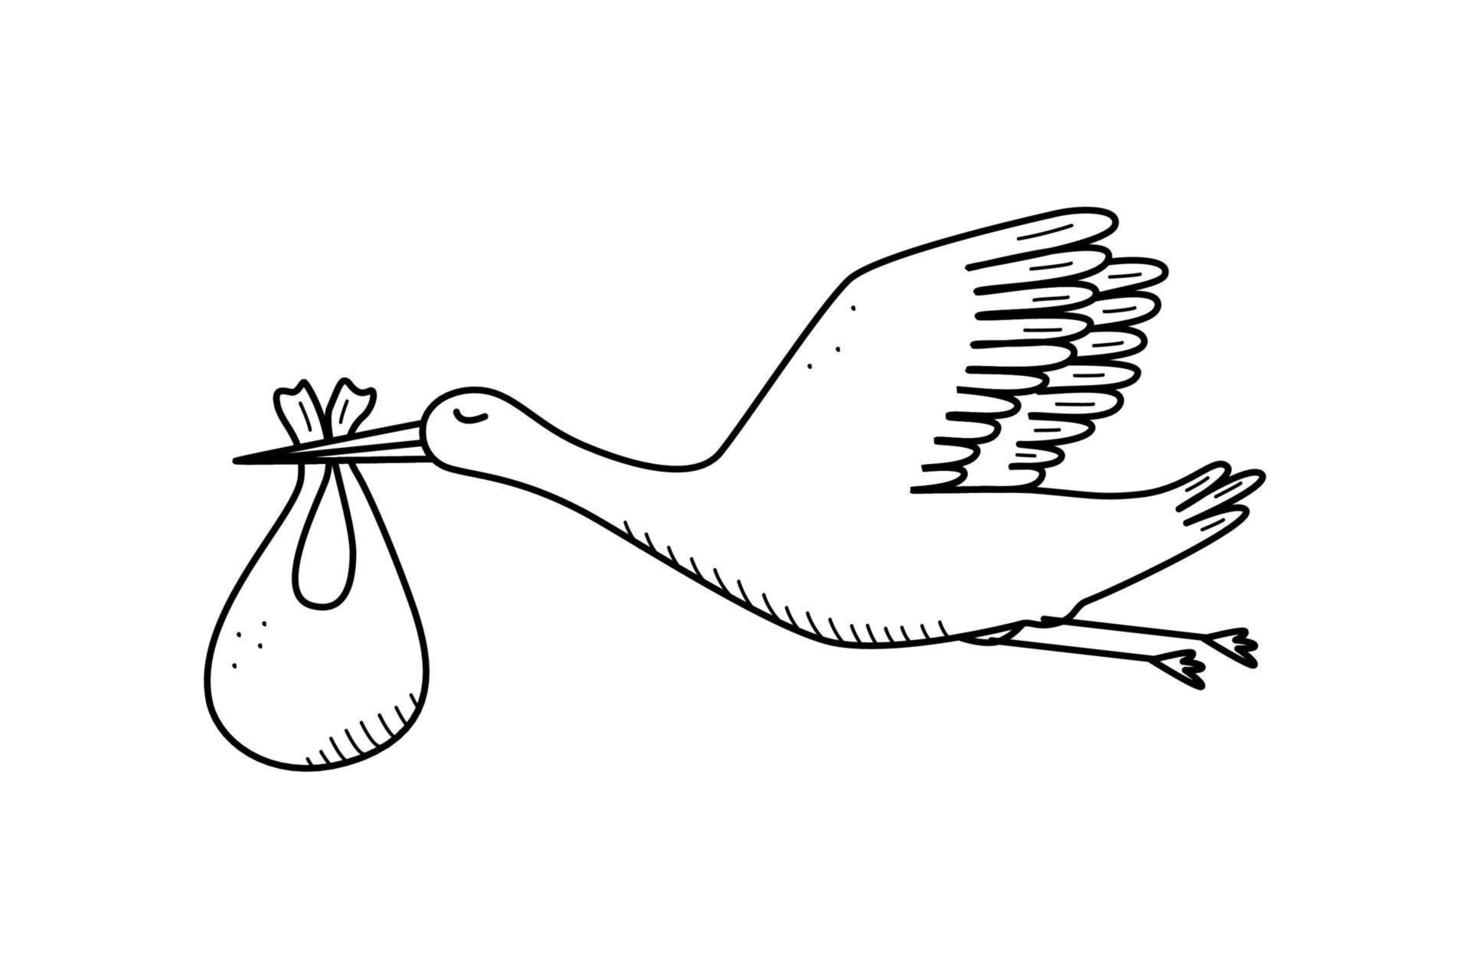 Stork and newborn cartoon doodle. Vector illustration of the concept of the birth or appearance of a baby.